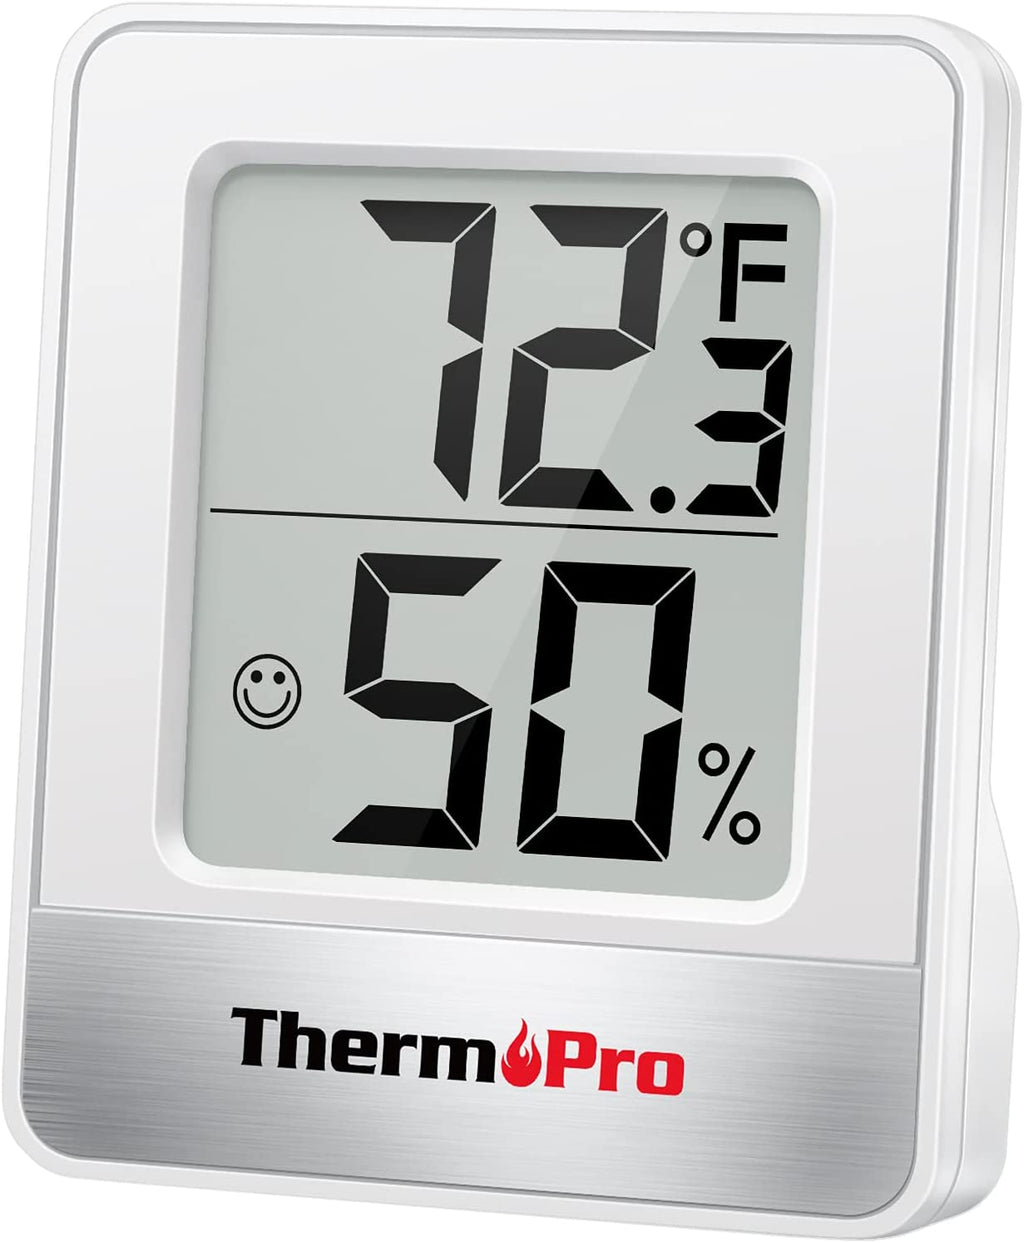 ThermoPro TP55 Digital Indoor Hygrometer Monitor for sale online